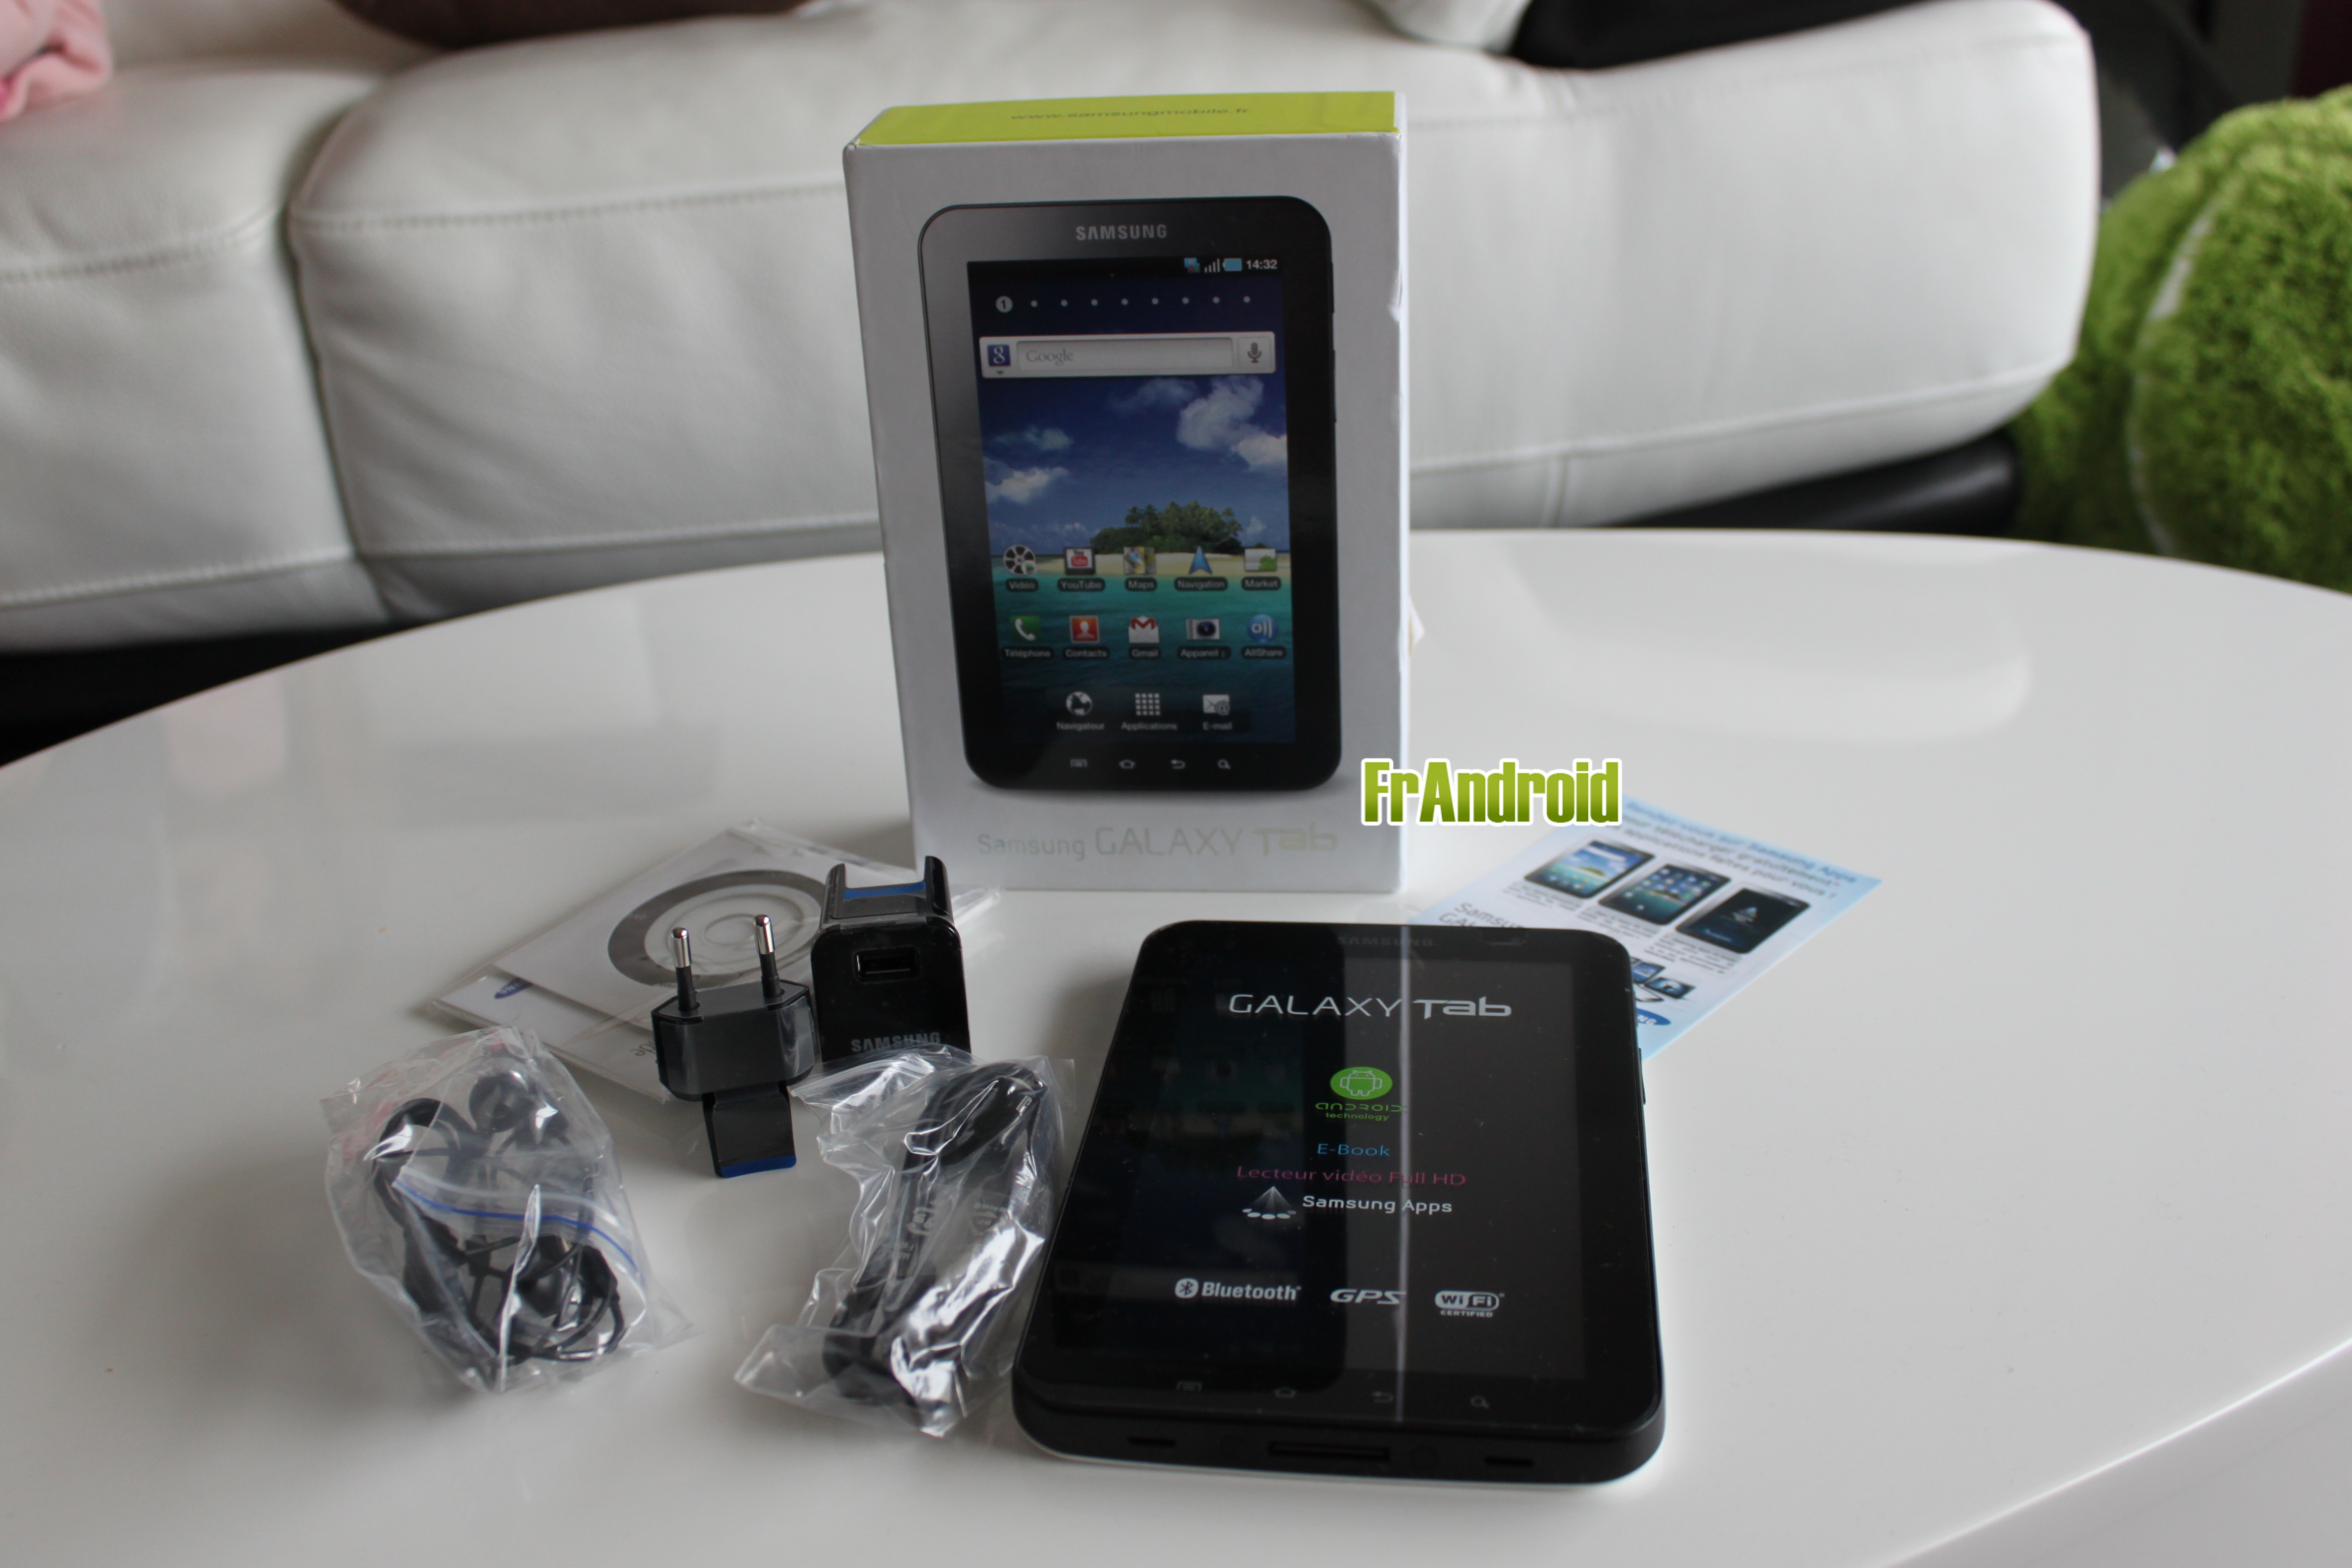 Chargeur voiture allume cigare auto Samsung Galaxy Tab GT P1000